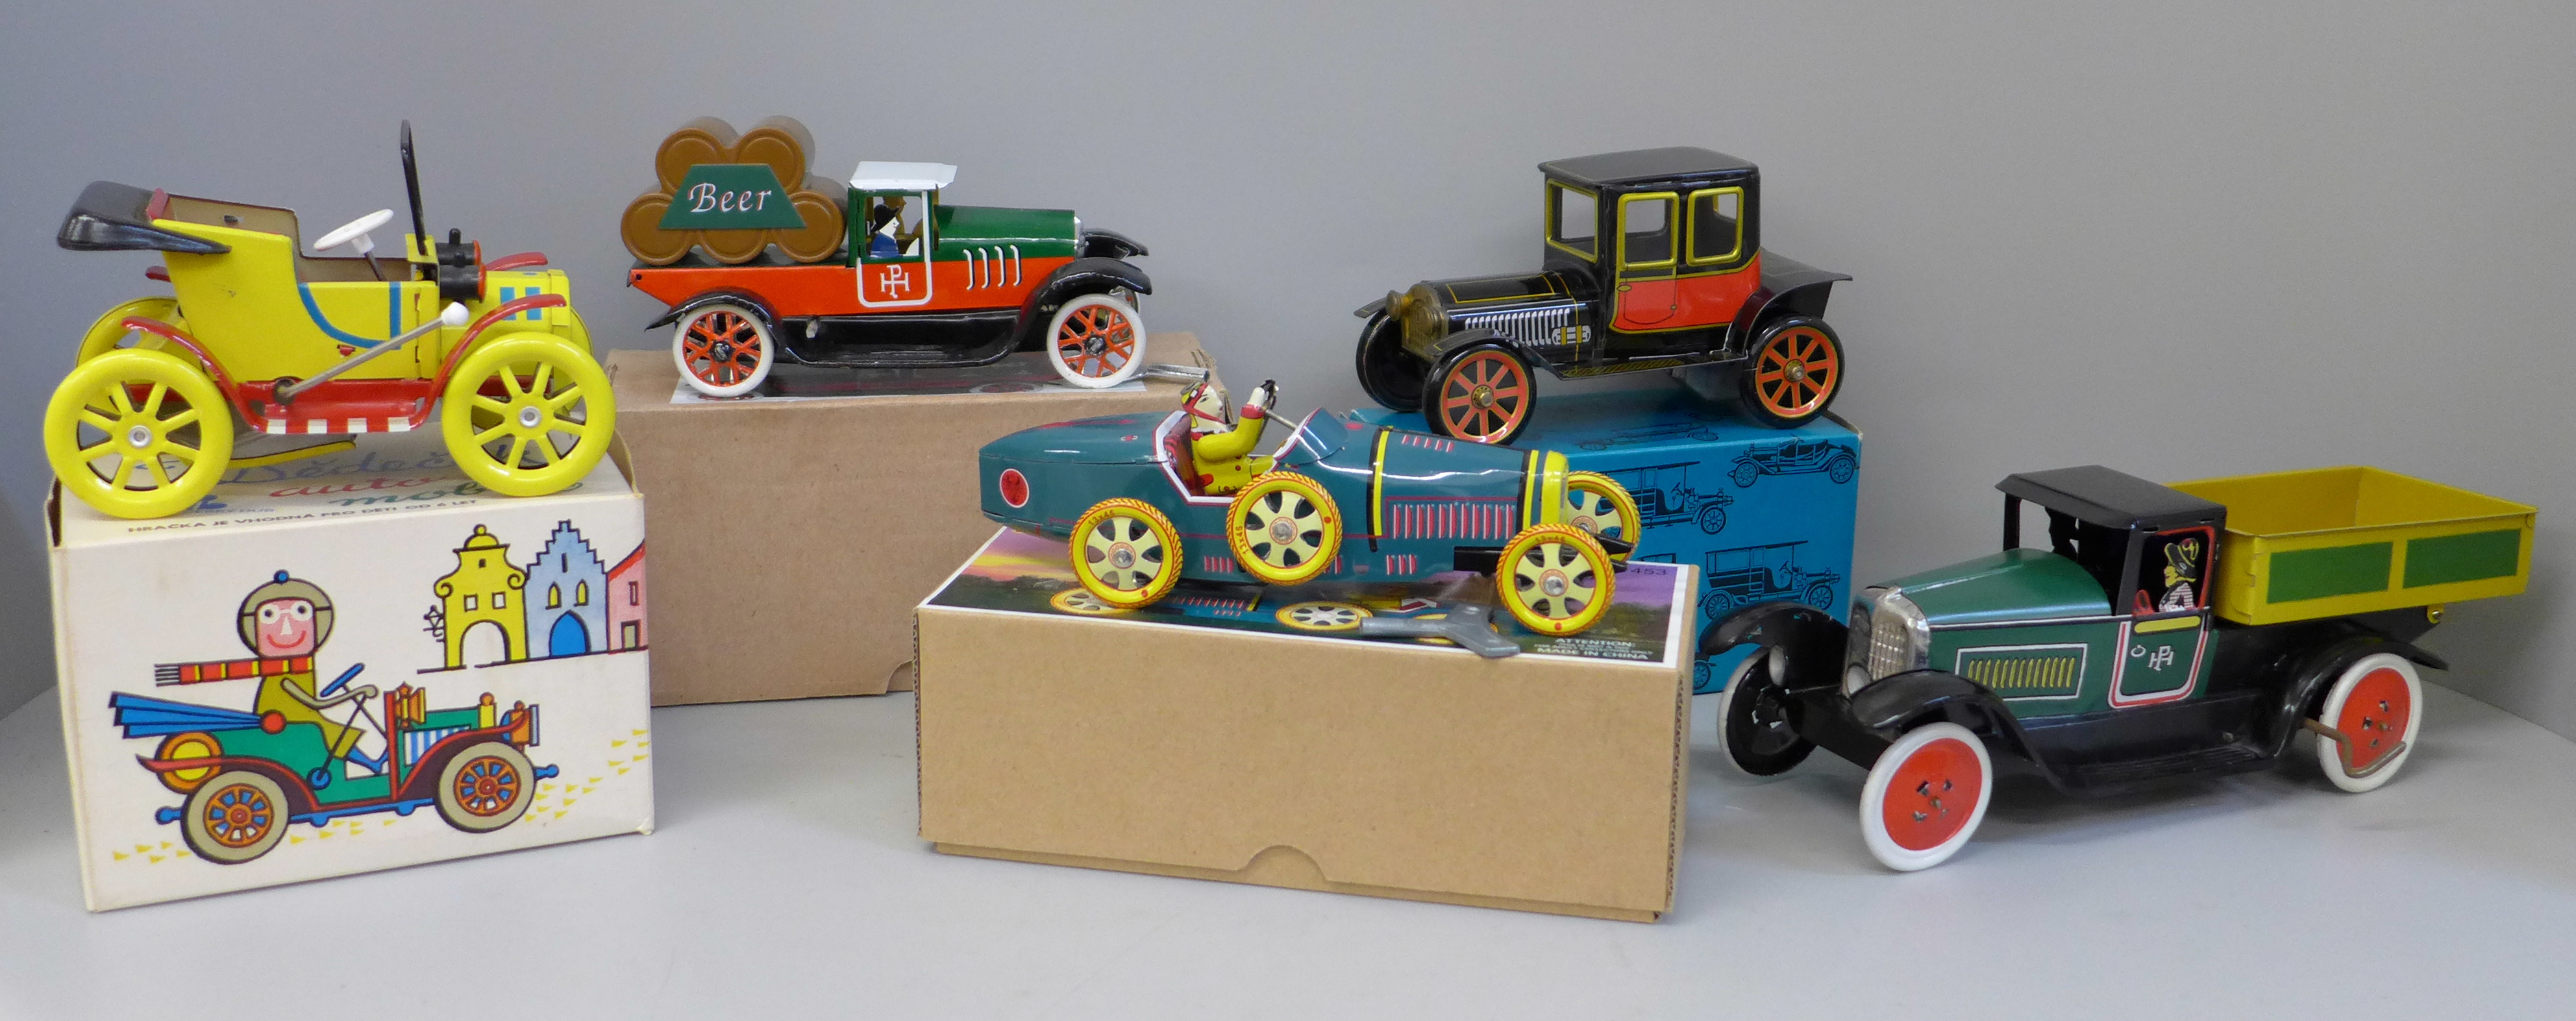 A collection of tin plate toys